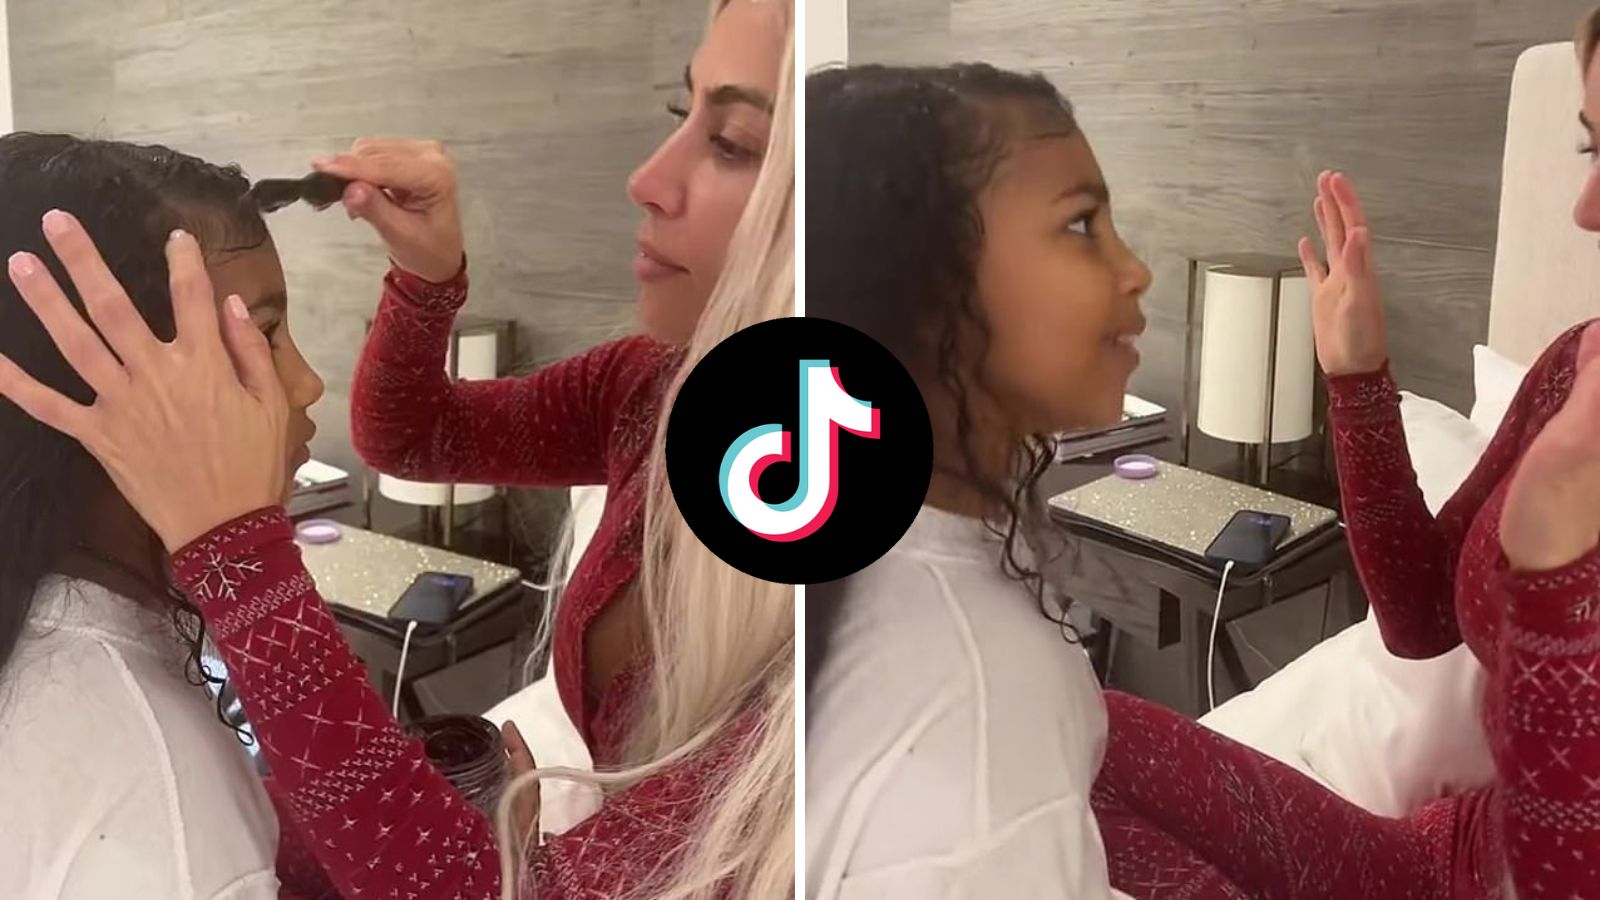 North West snaps at mom Kim Kardashian as she styles her hair in viral TikTok